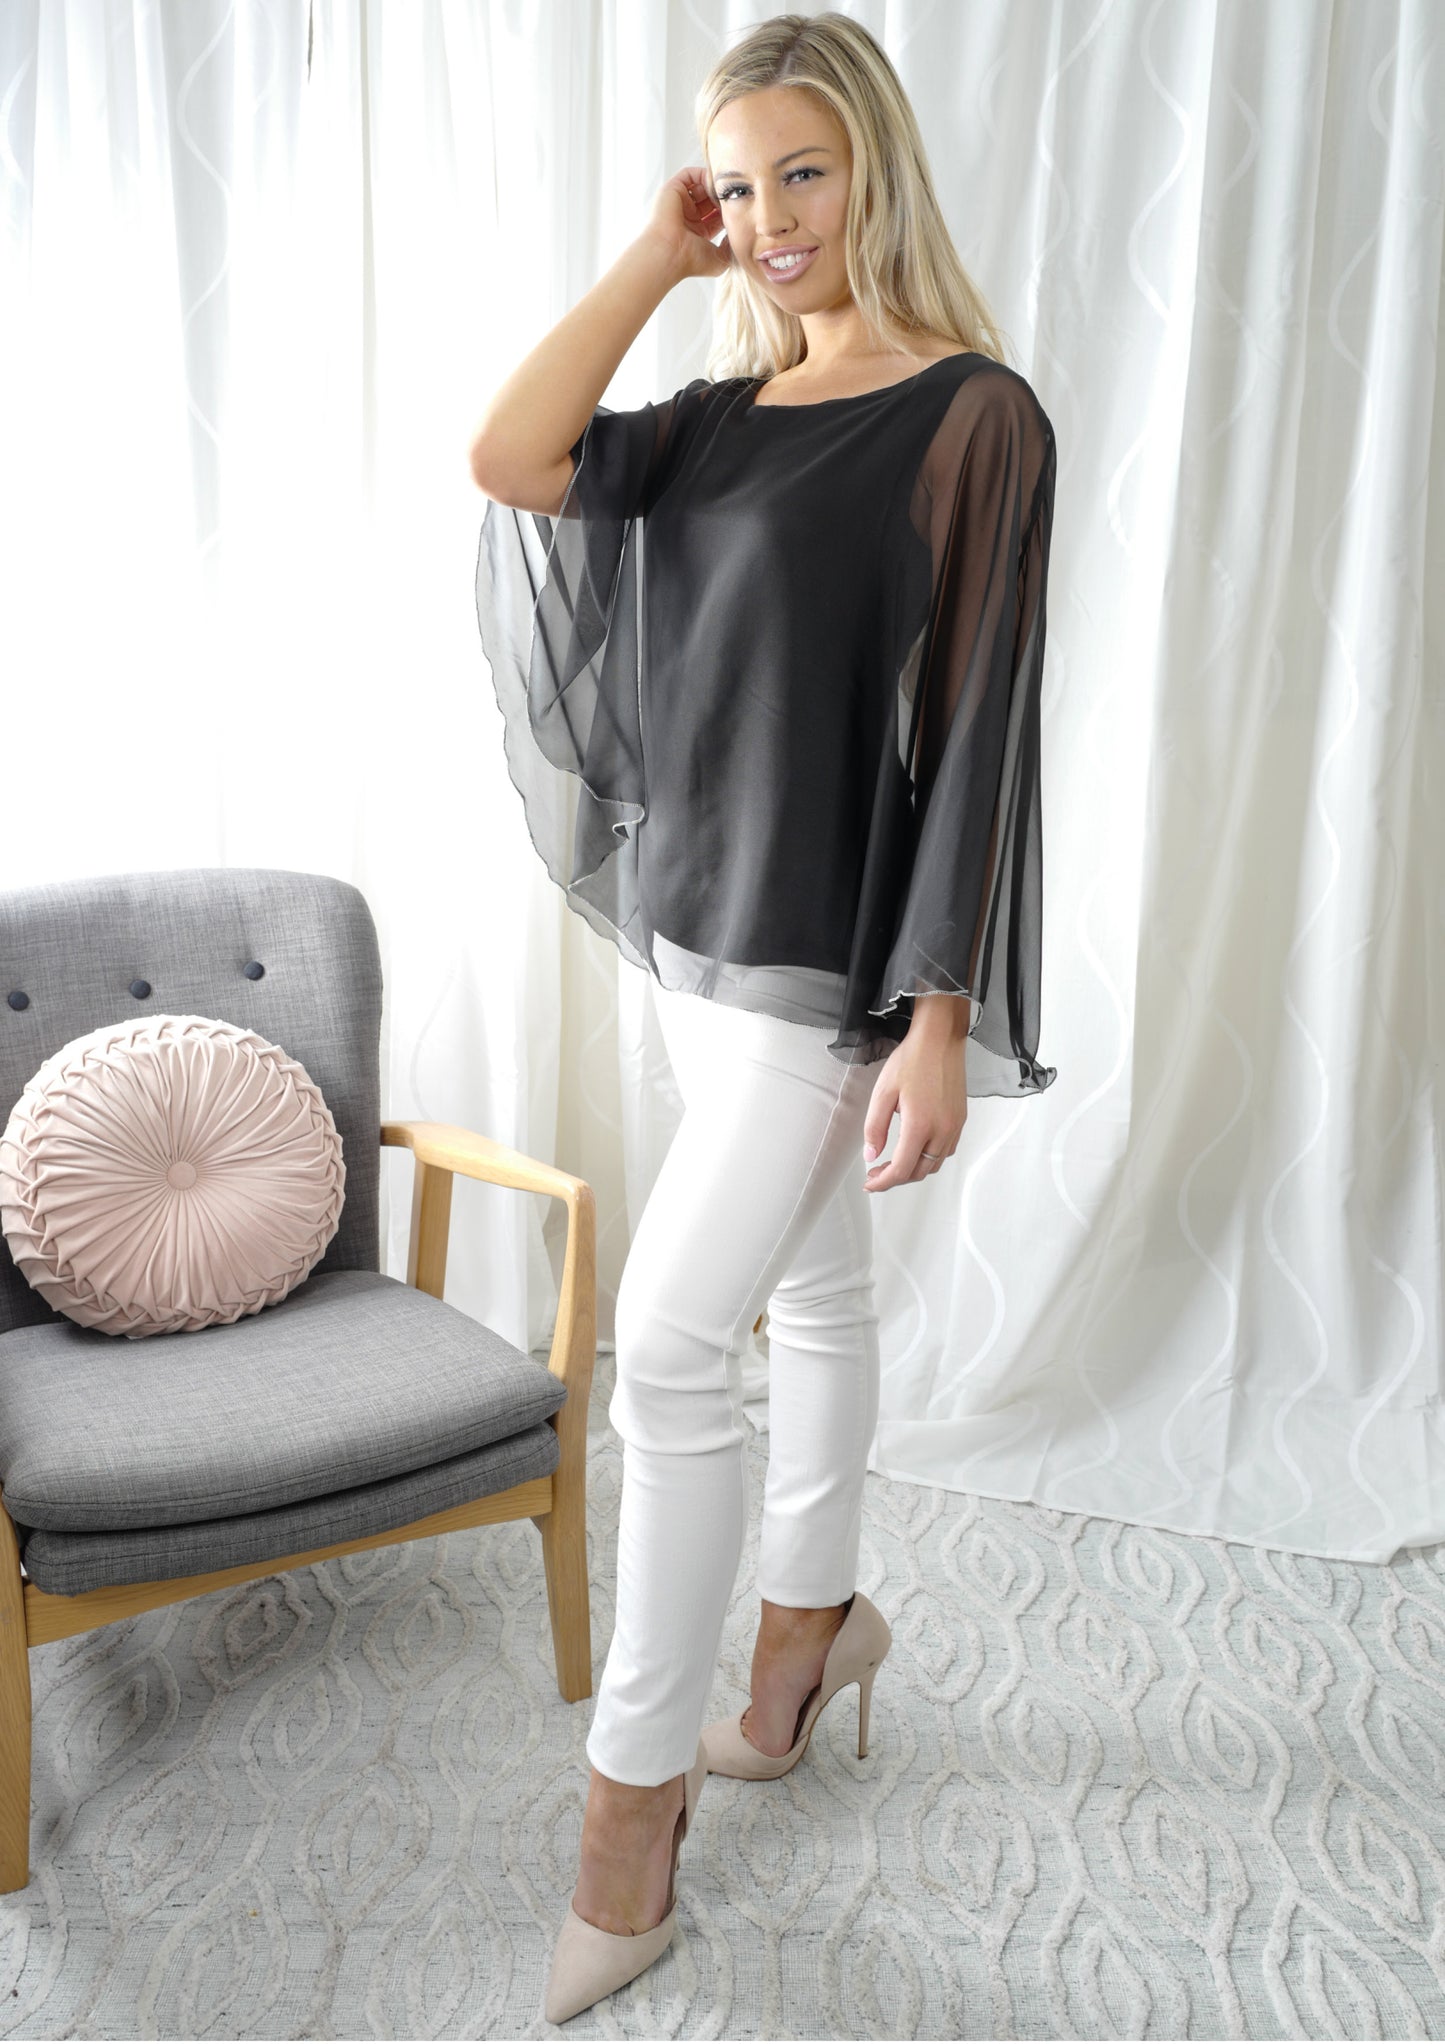 VY0397TB Chiffon Overlay Top (Pack) On Sale$10